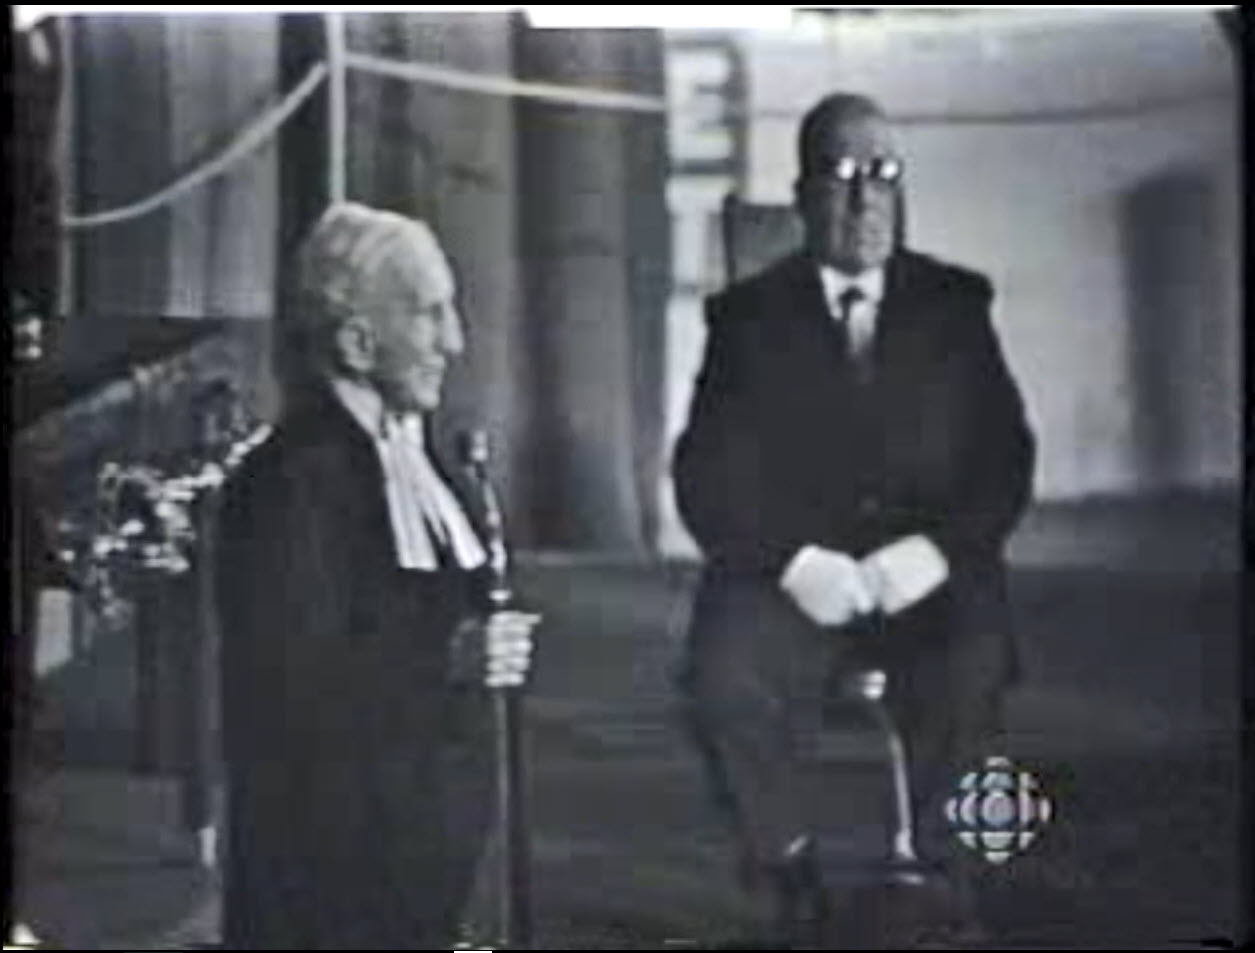 CBC Coverage of the centennial sitting in New Westminster, 1967.